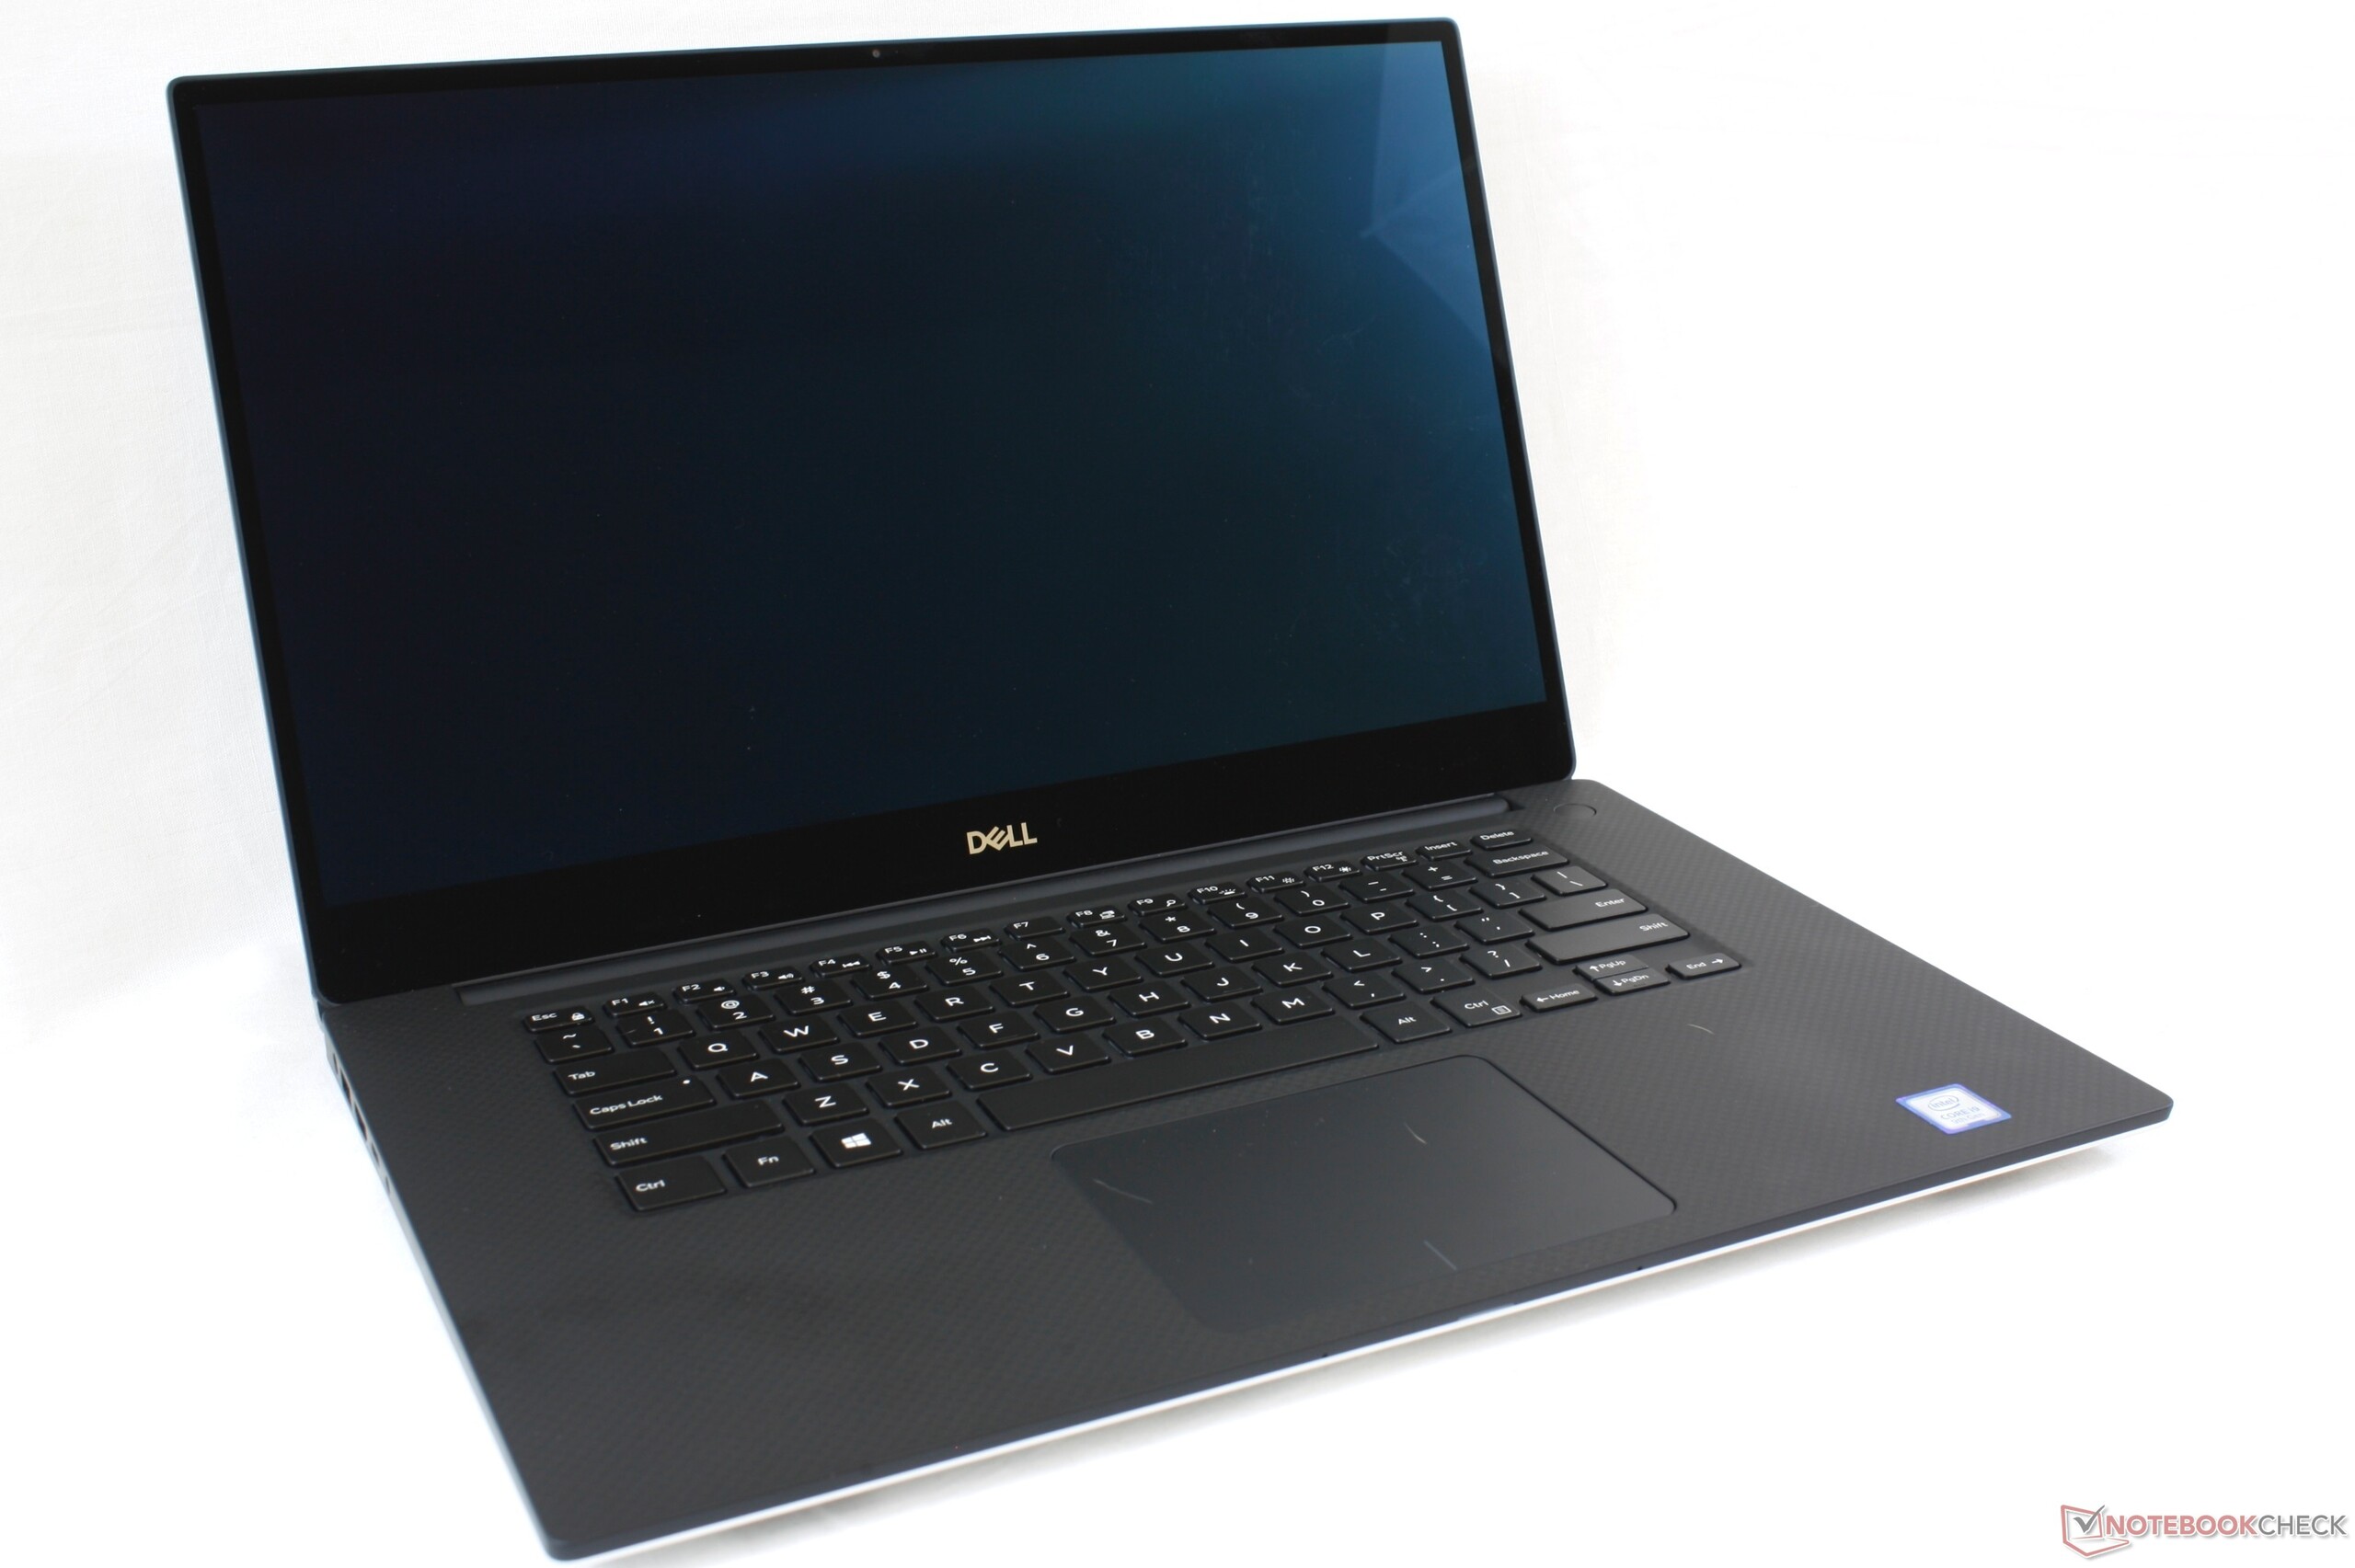 Dell Precision 5540 in Review: Workstation Doubles as a Hand